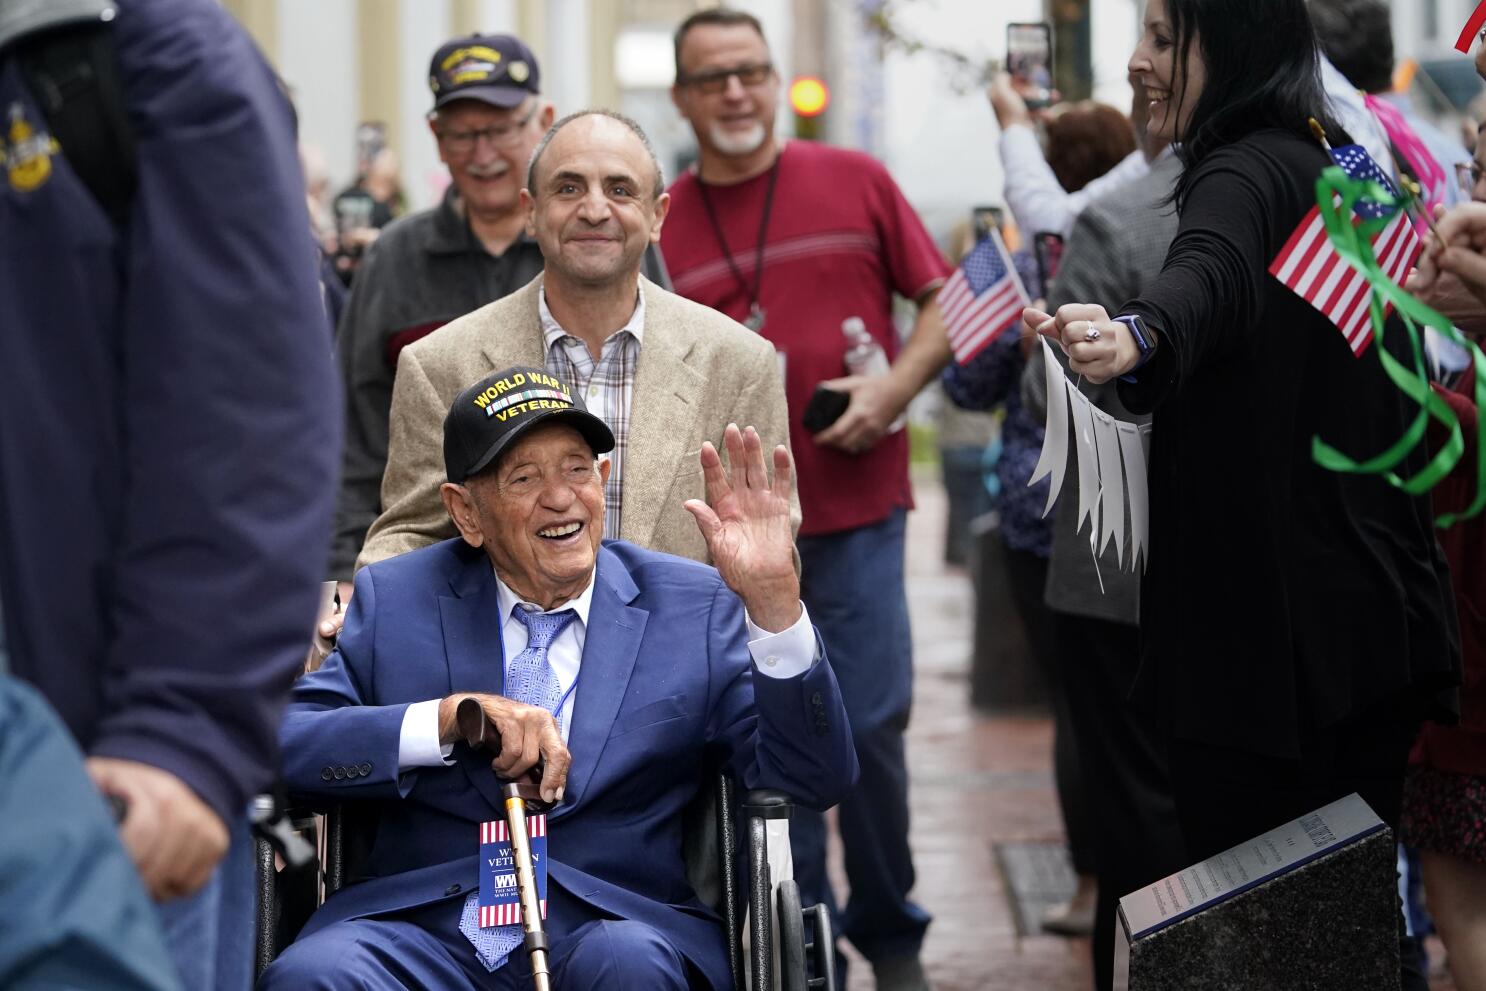 95-year-old D-Day survivor shares his WWII experiences, Article